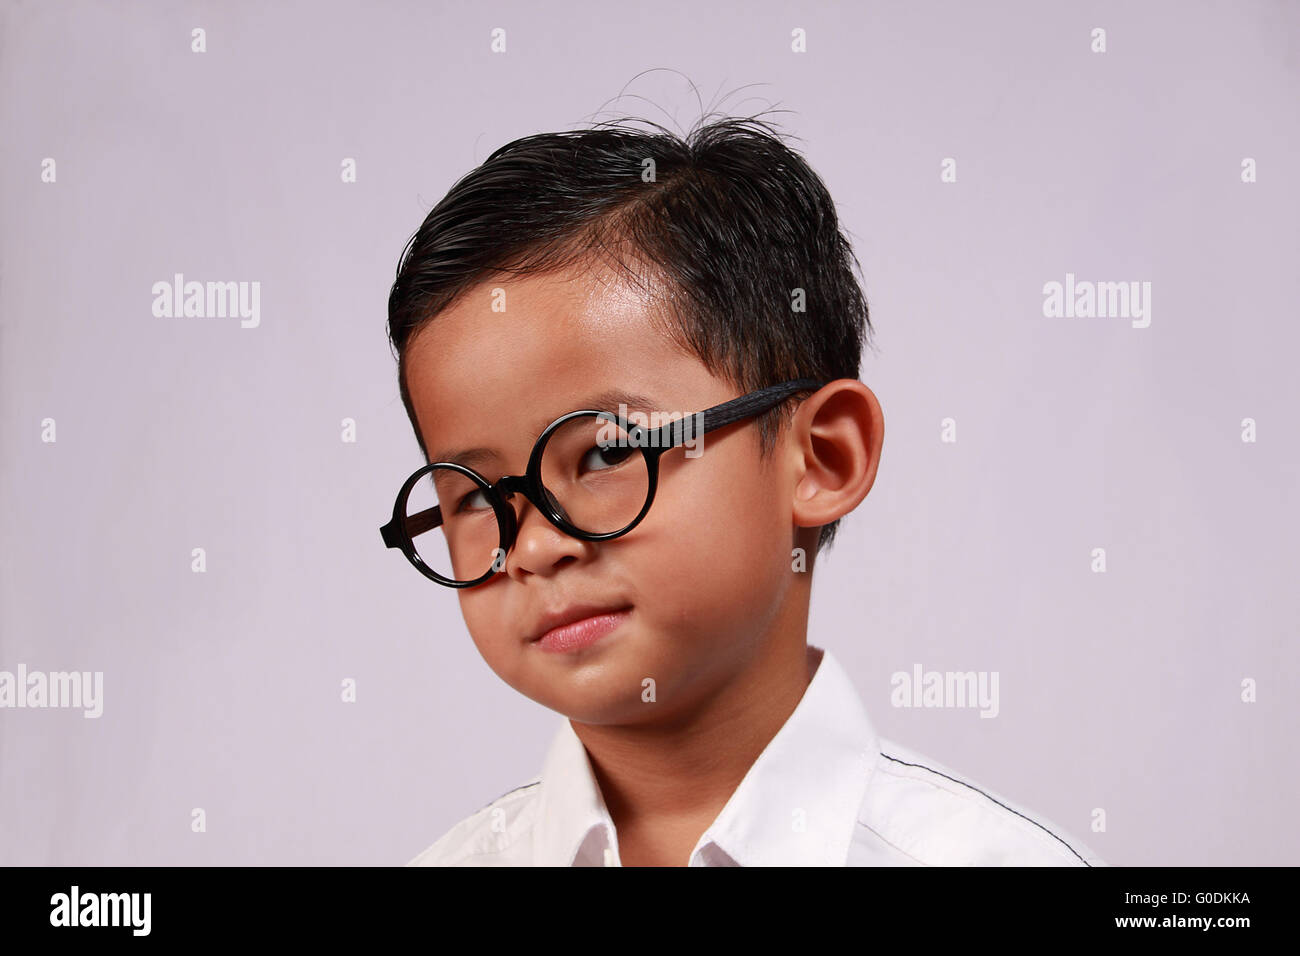 Portrait of smart young Asian boy with glasses showing his adorable smile Stock Photo